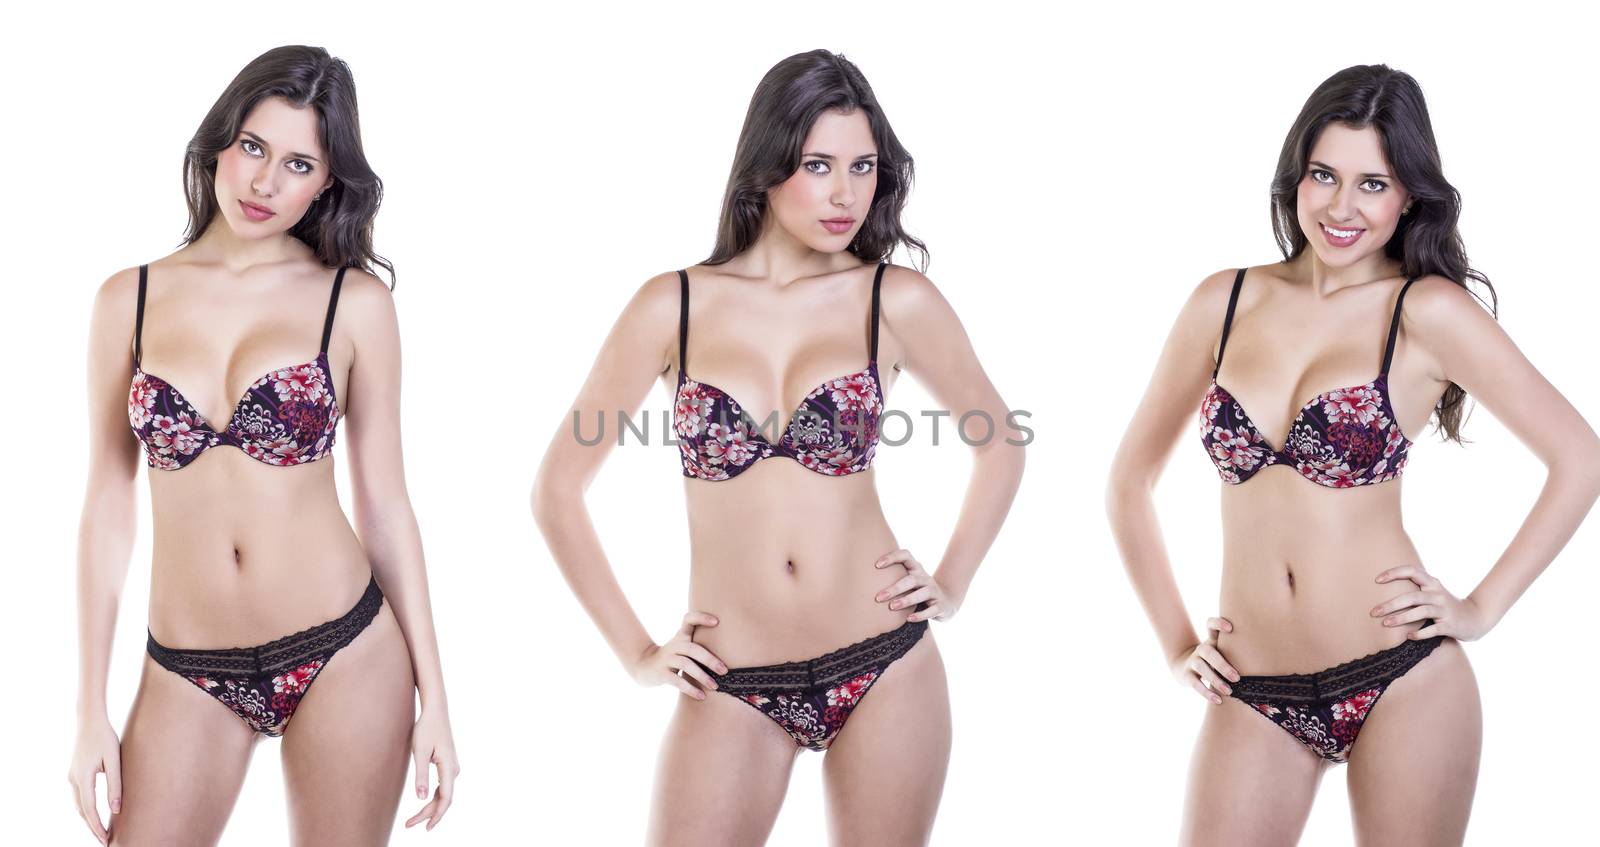 Sexy brunette woman posing in lingerie on isolated white